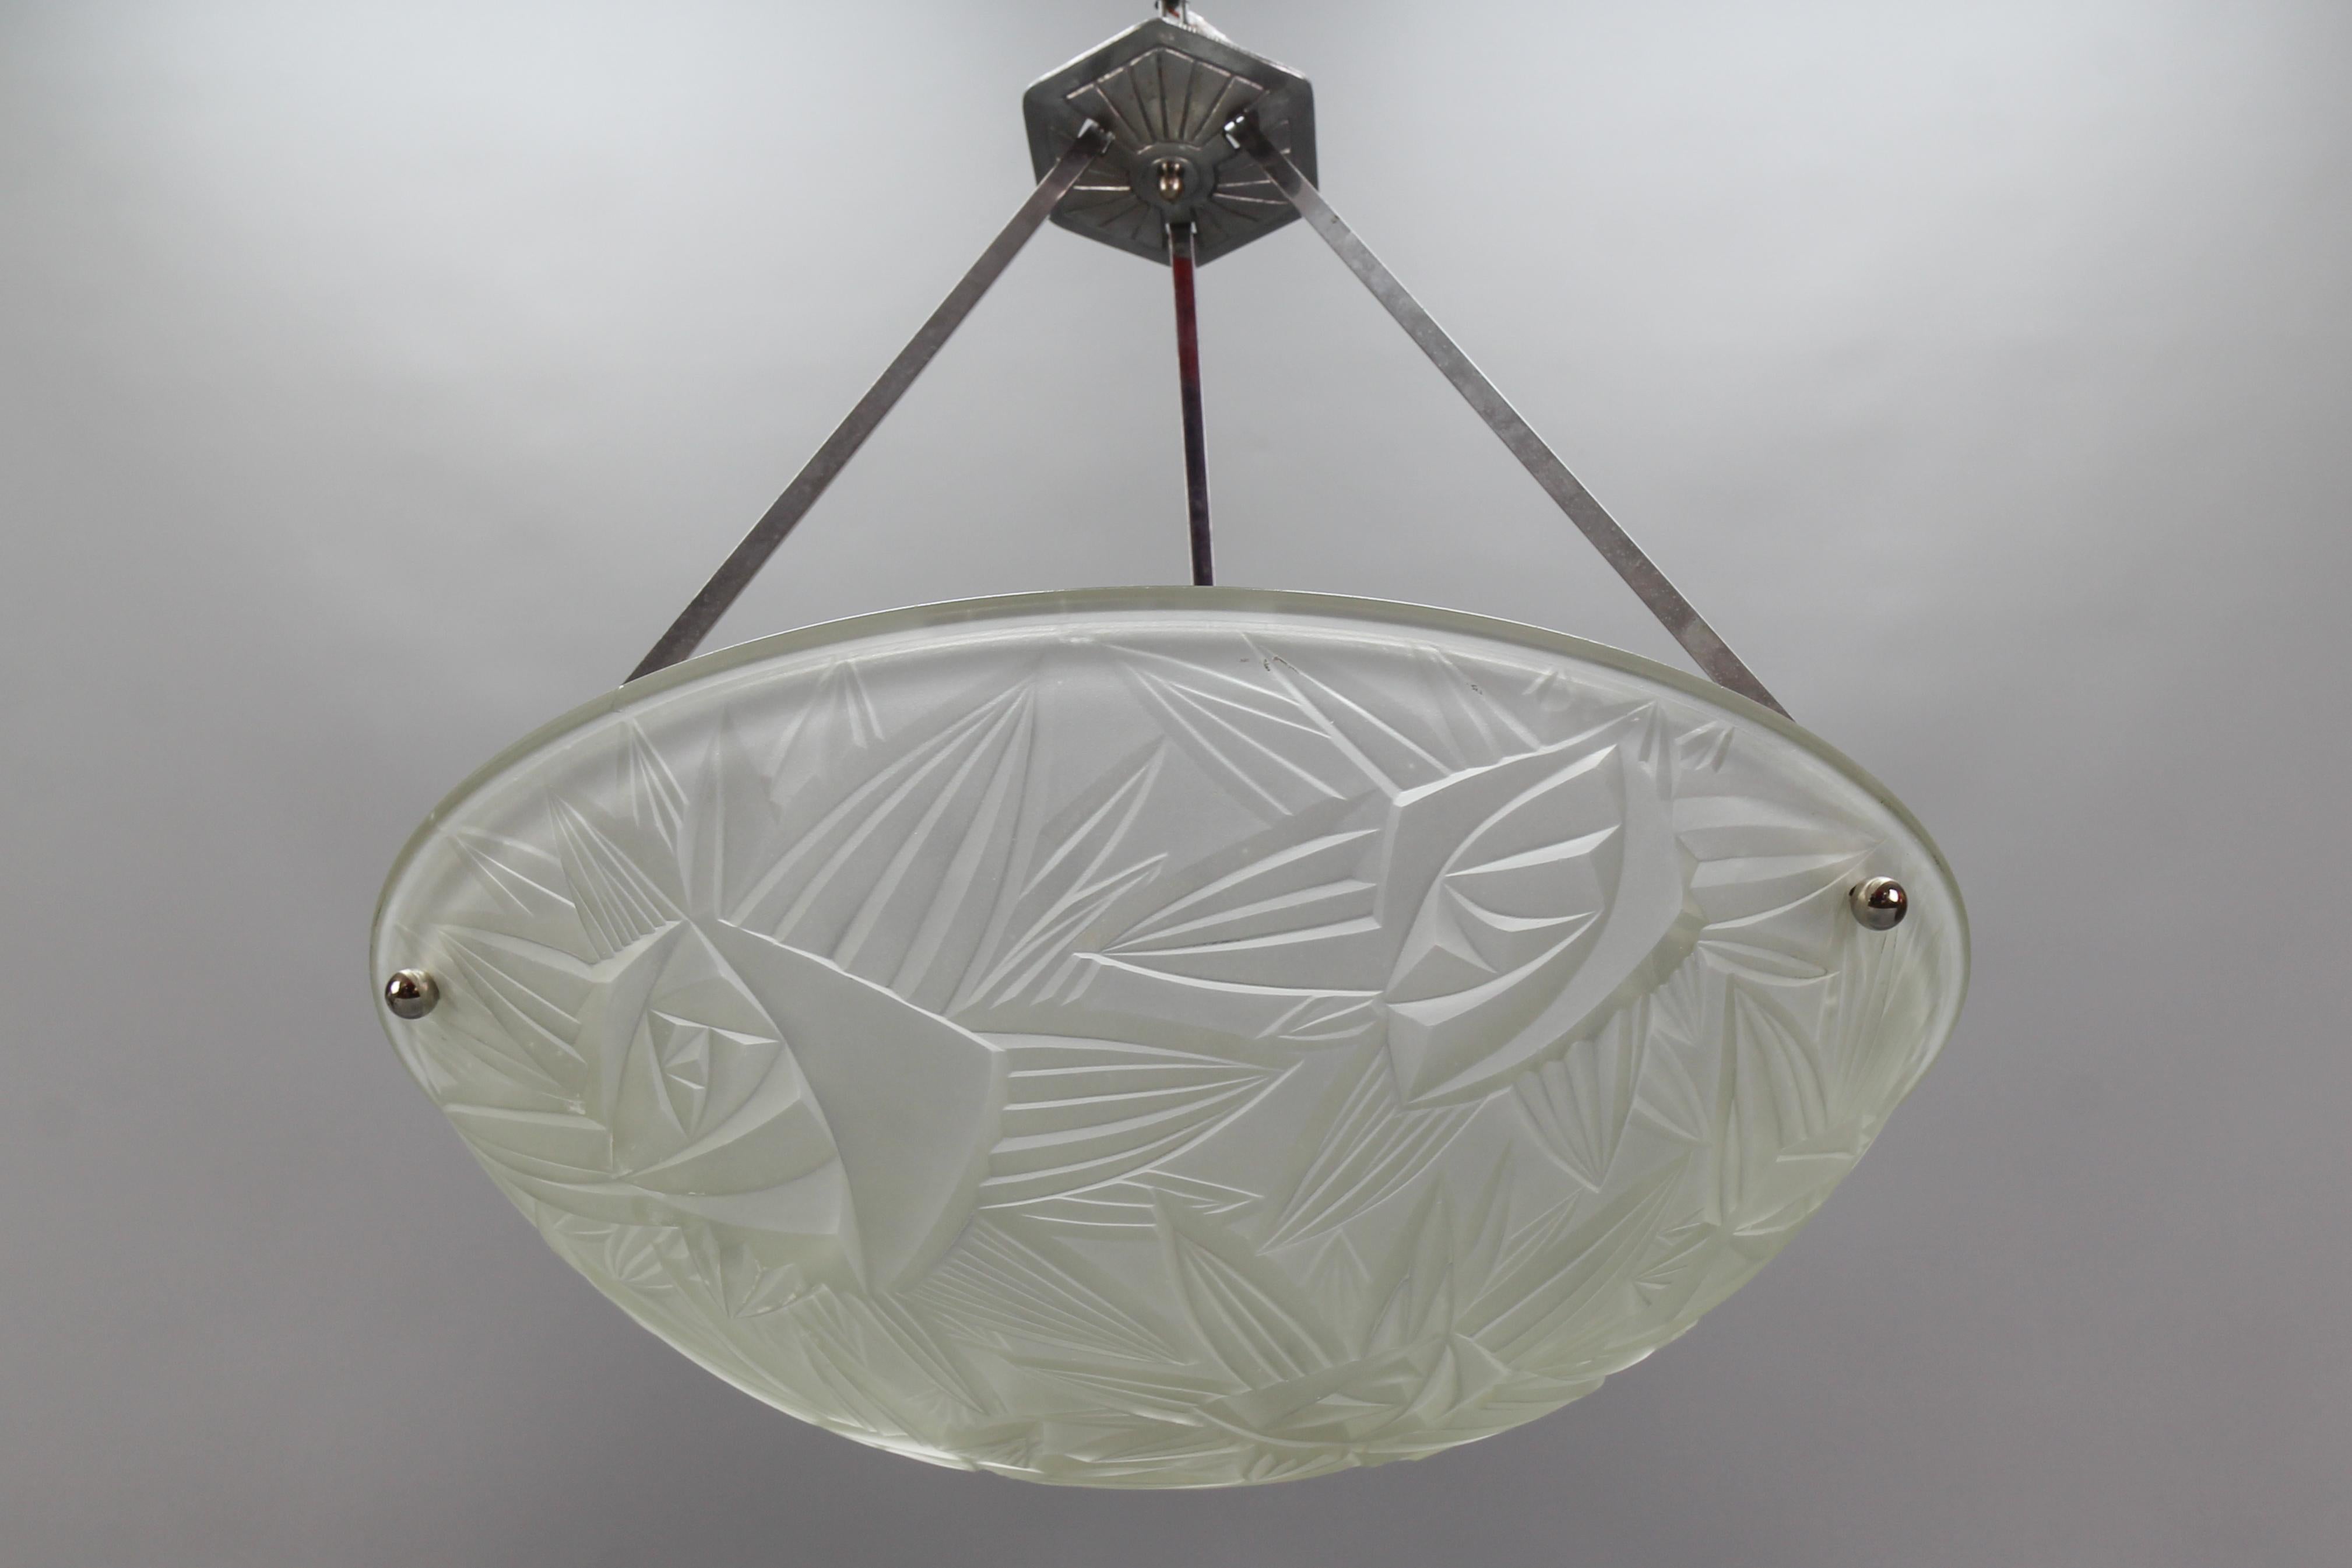 French Art Deco pendant light with frosted white glass lamp shade/bowl by Jean Noverdy, circa the 1930s.
This beautifully shaped white frosted glass bowl features stylized flower and leaf decoration, marked on the edge ”Noverdy France Depose” and